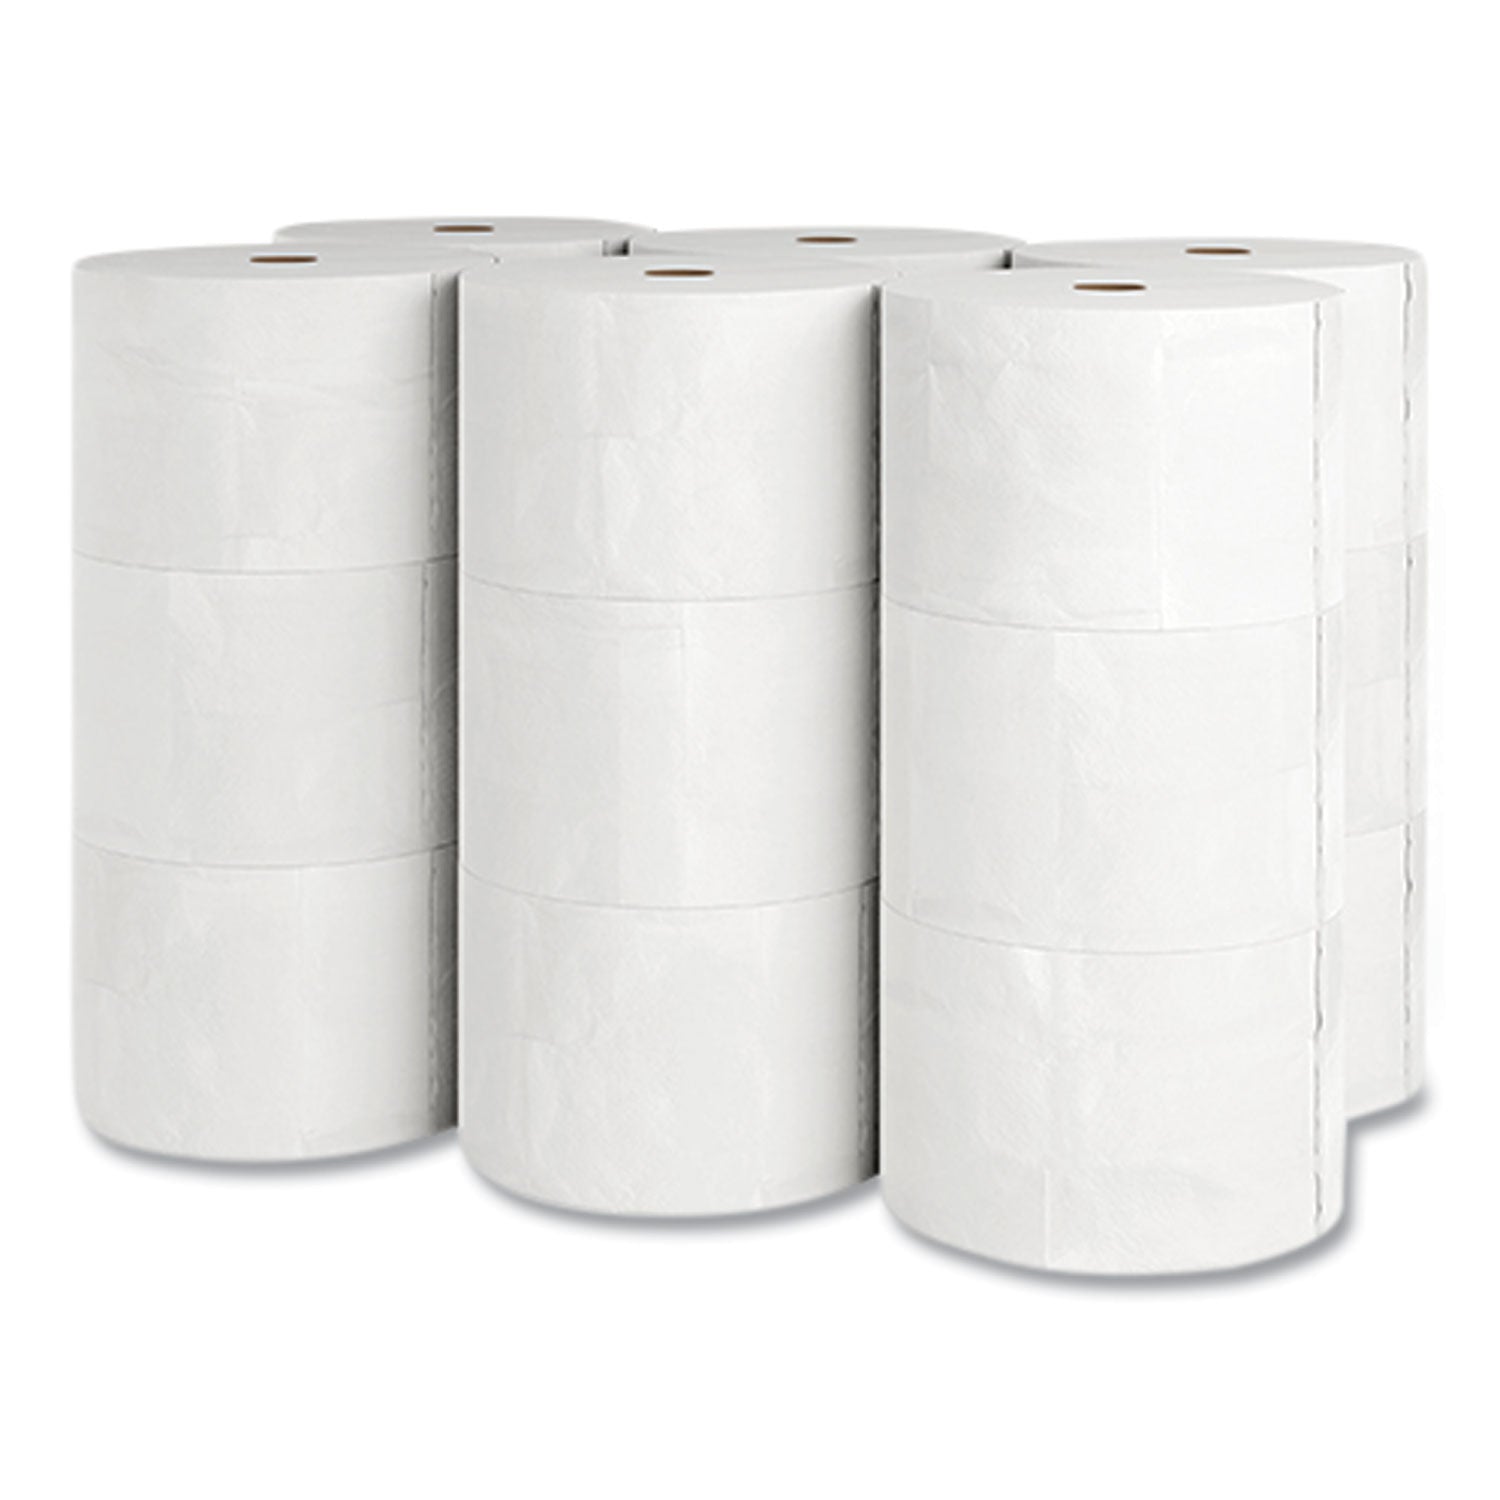 j-series-2-ply-small-core-bath-tissue-septic-safe-white-1500-sheets-roll-18-rolls-carton_cwz24405975 - 2